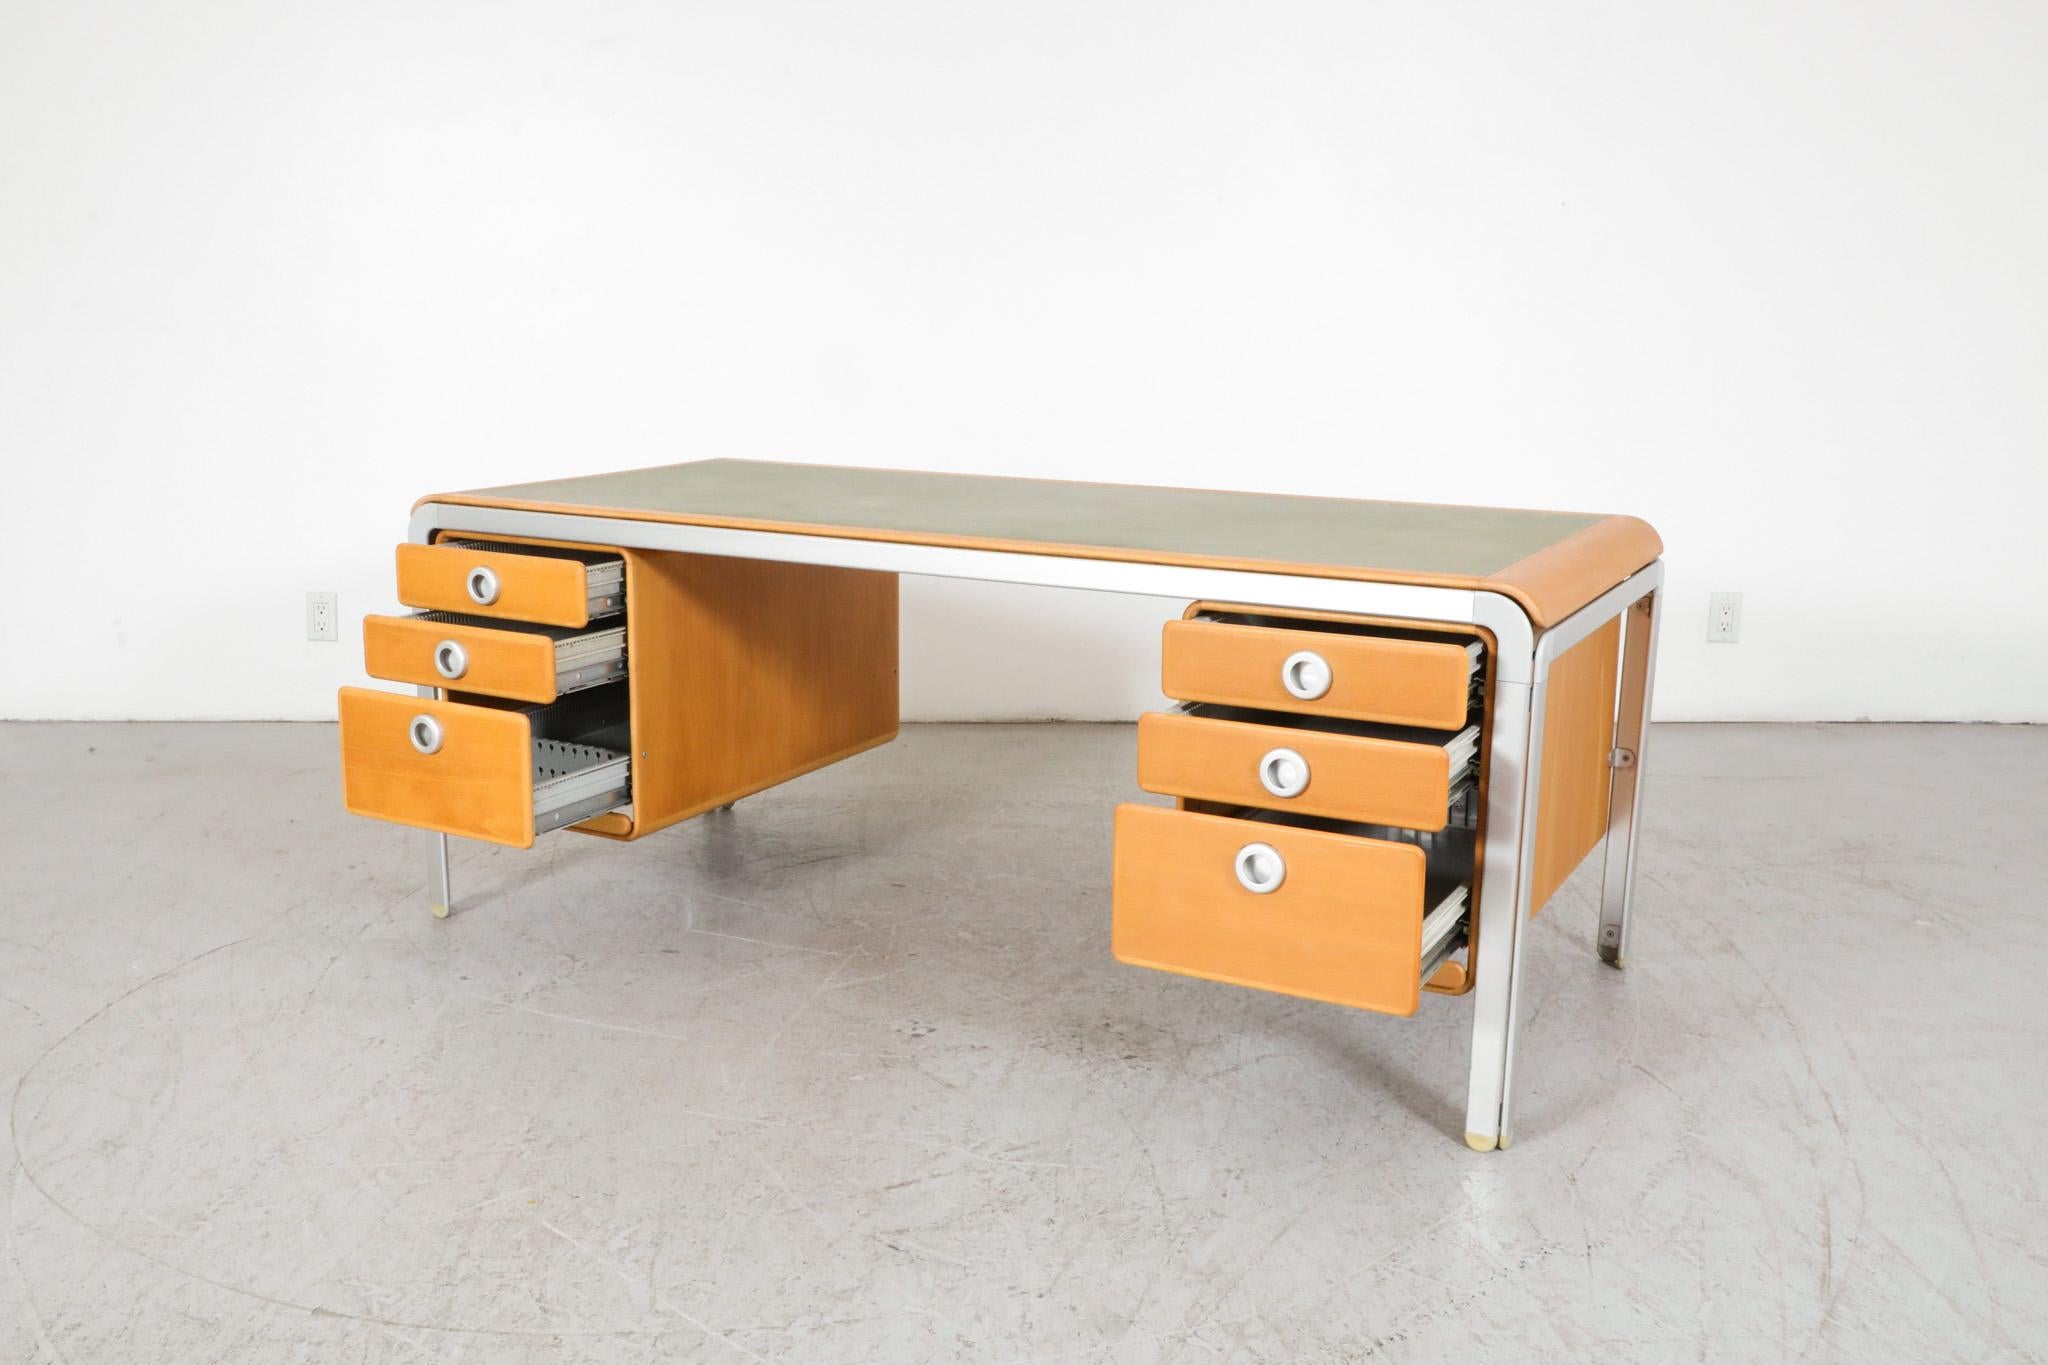 Rare Arne Jacobsen 'Djob' Writing Desk, 1971 In Good Condition For Sale In Los Angeles, CA